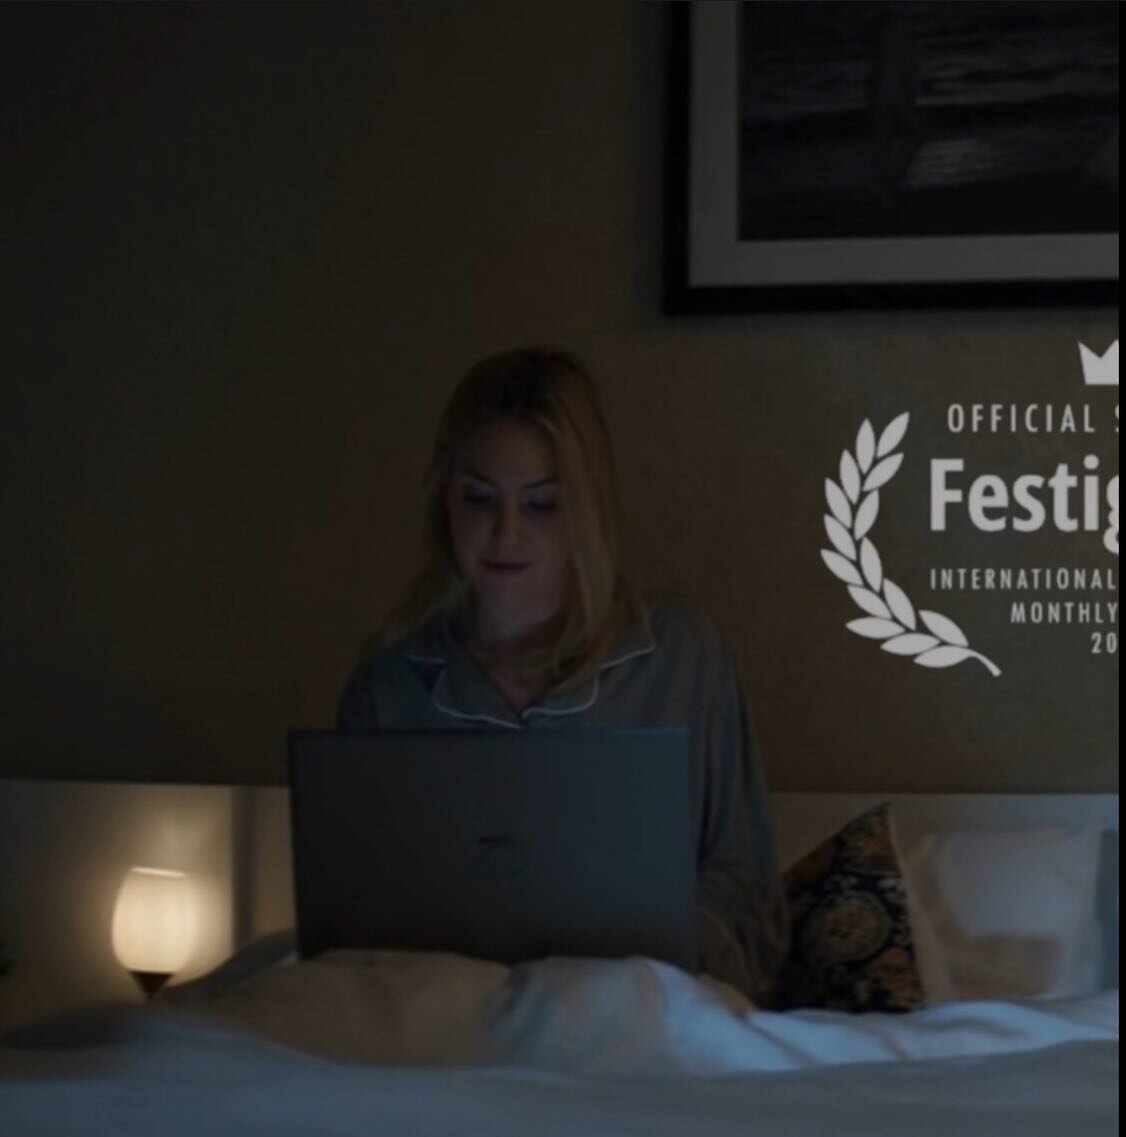 You, Me &amp; Her is sliding into @festigious film festival next month in competition for Best Comedy!